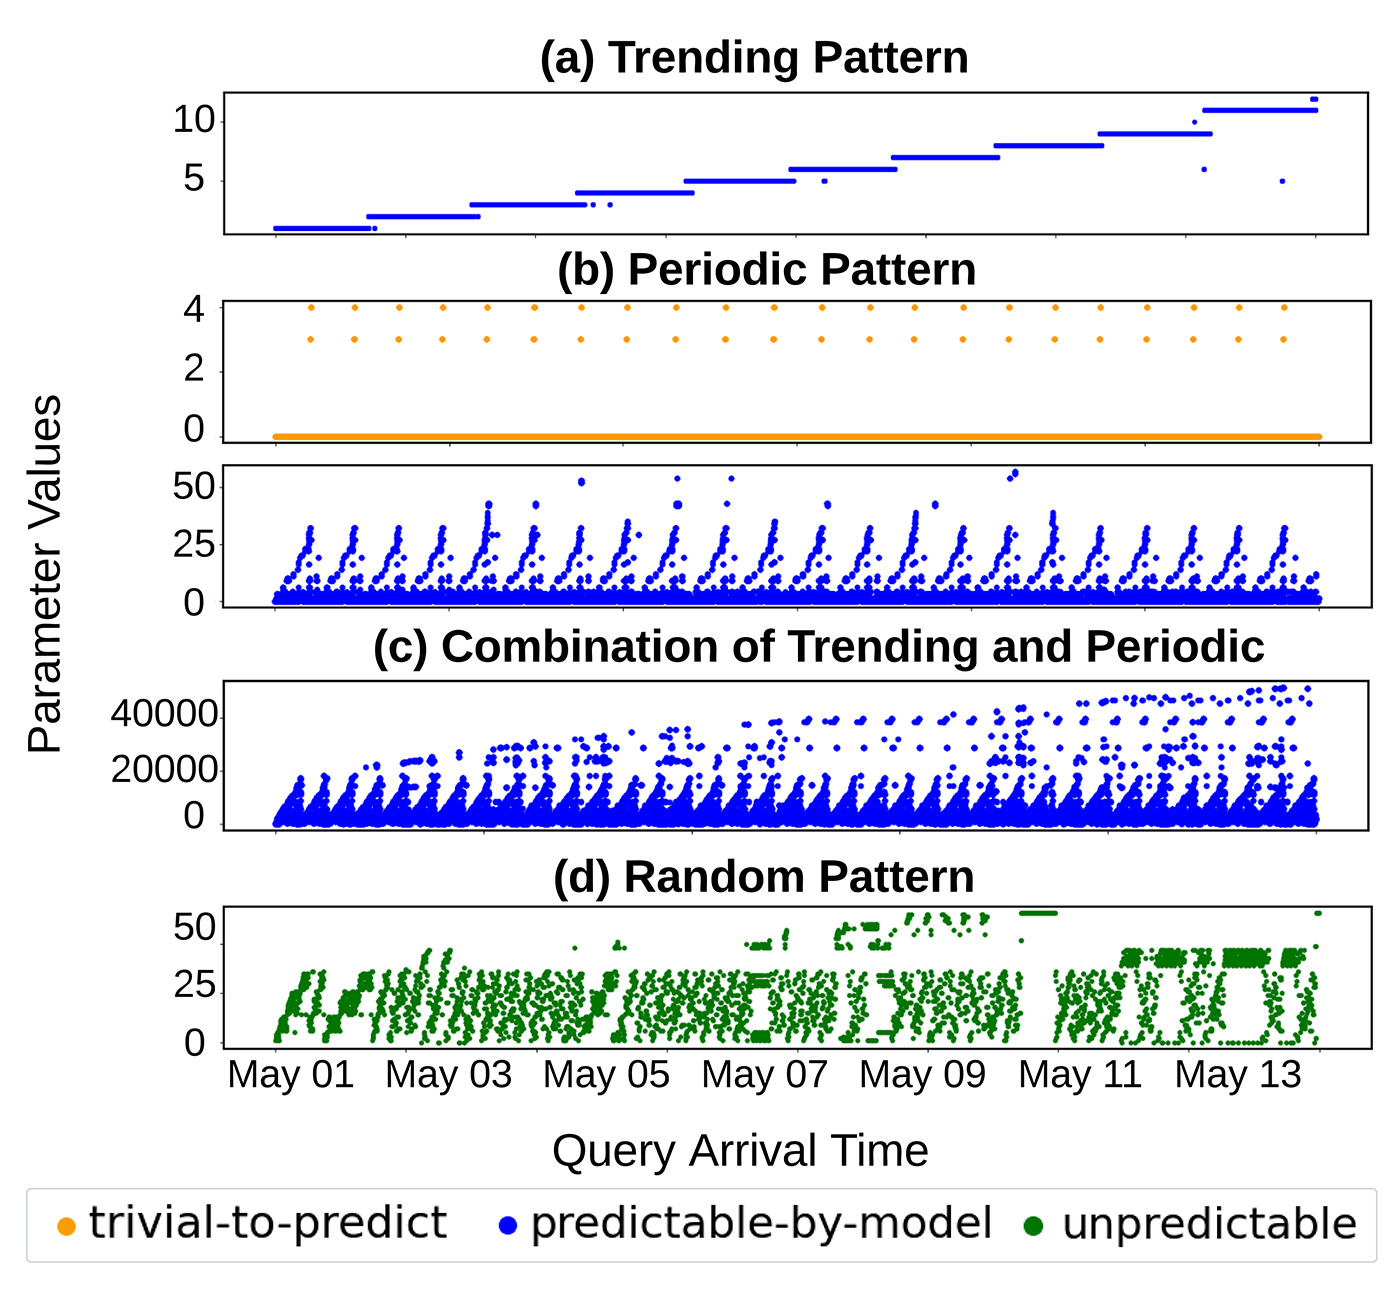 A figure illustrating the analysis of how parameter changes with query arrival times, identifying four common patterns. The Y-axis represents the query arrival time and the X-axis shows the parameter values. Section (a) shows the trending pattern, which includes increasing, decreasing trends. Section (b) displays the periodic pattern, characterized by a regular pattern with fixed intervals such as hourly, daily, or weekly. Section (c) combines the trending and periodic patterns, while section (d) represents the random pattern, indicating no regular or predictable pattern. 